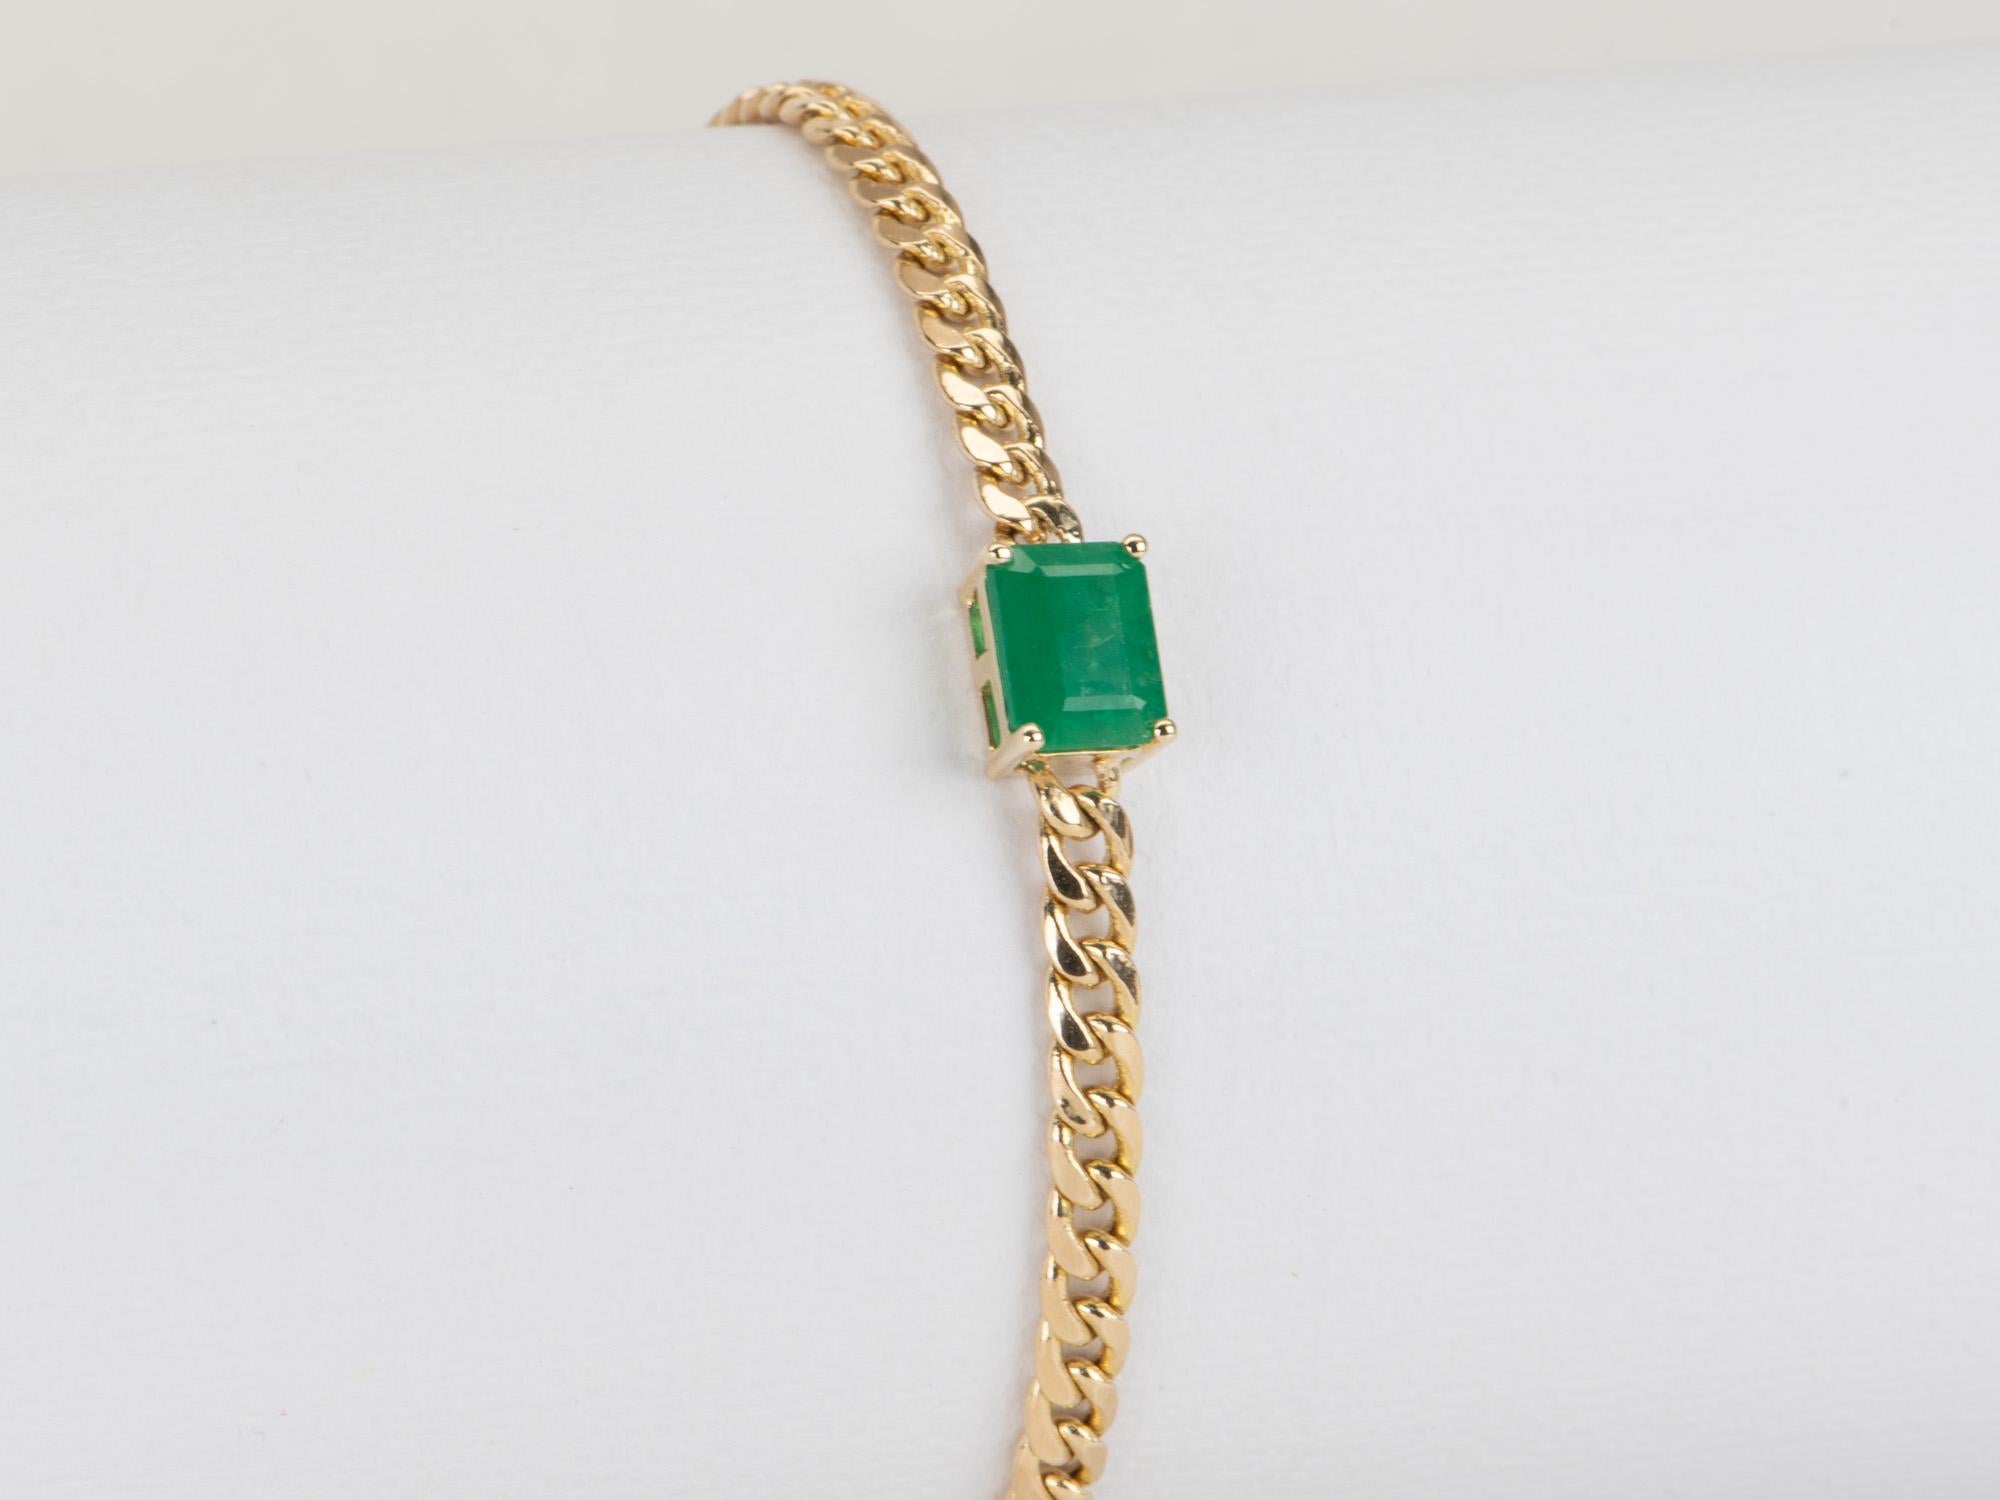 ♥ A 14K gold Miami Cuban link chain bracelet with a stunning Zambian emerald pendant in the center
♥ The Miami Cuban link chain is 3.5mm wide
♥ We have two bracelets available. The emeralds are very similar in color, shape, and size. The chains are